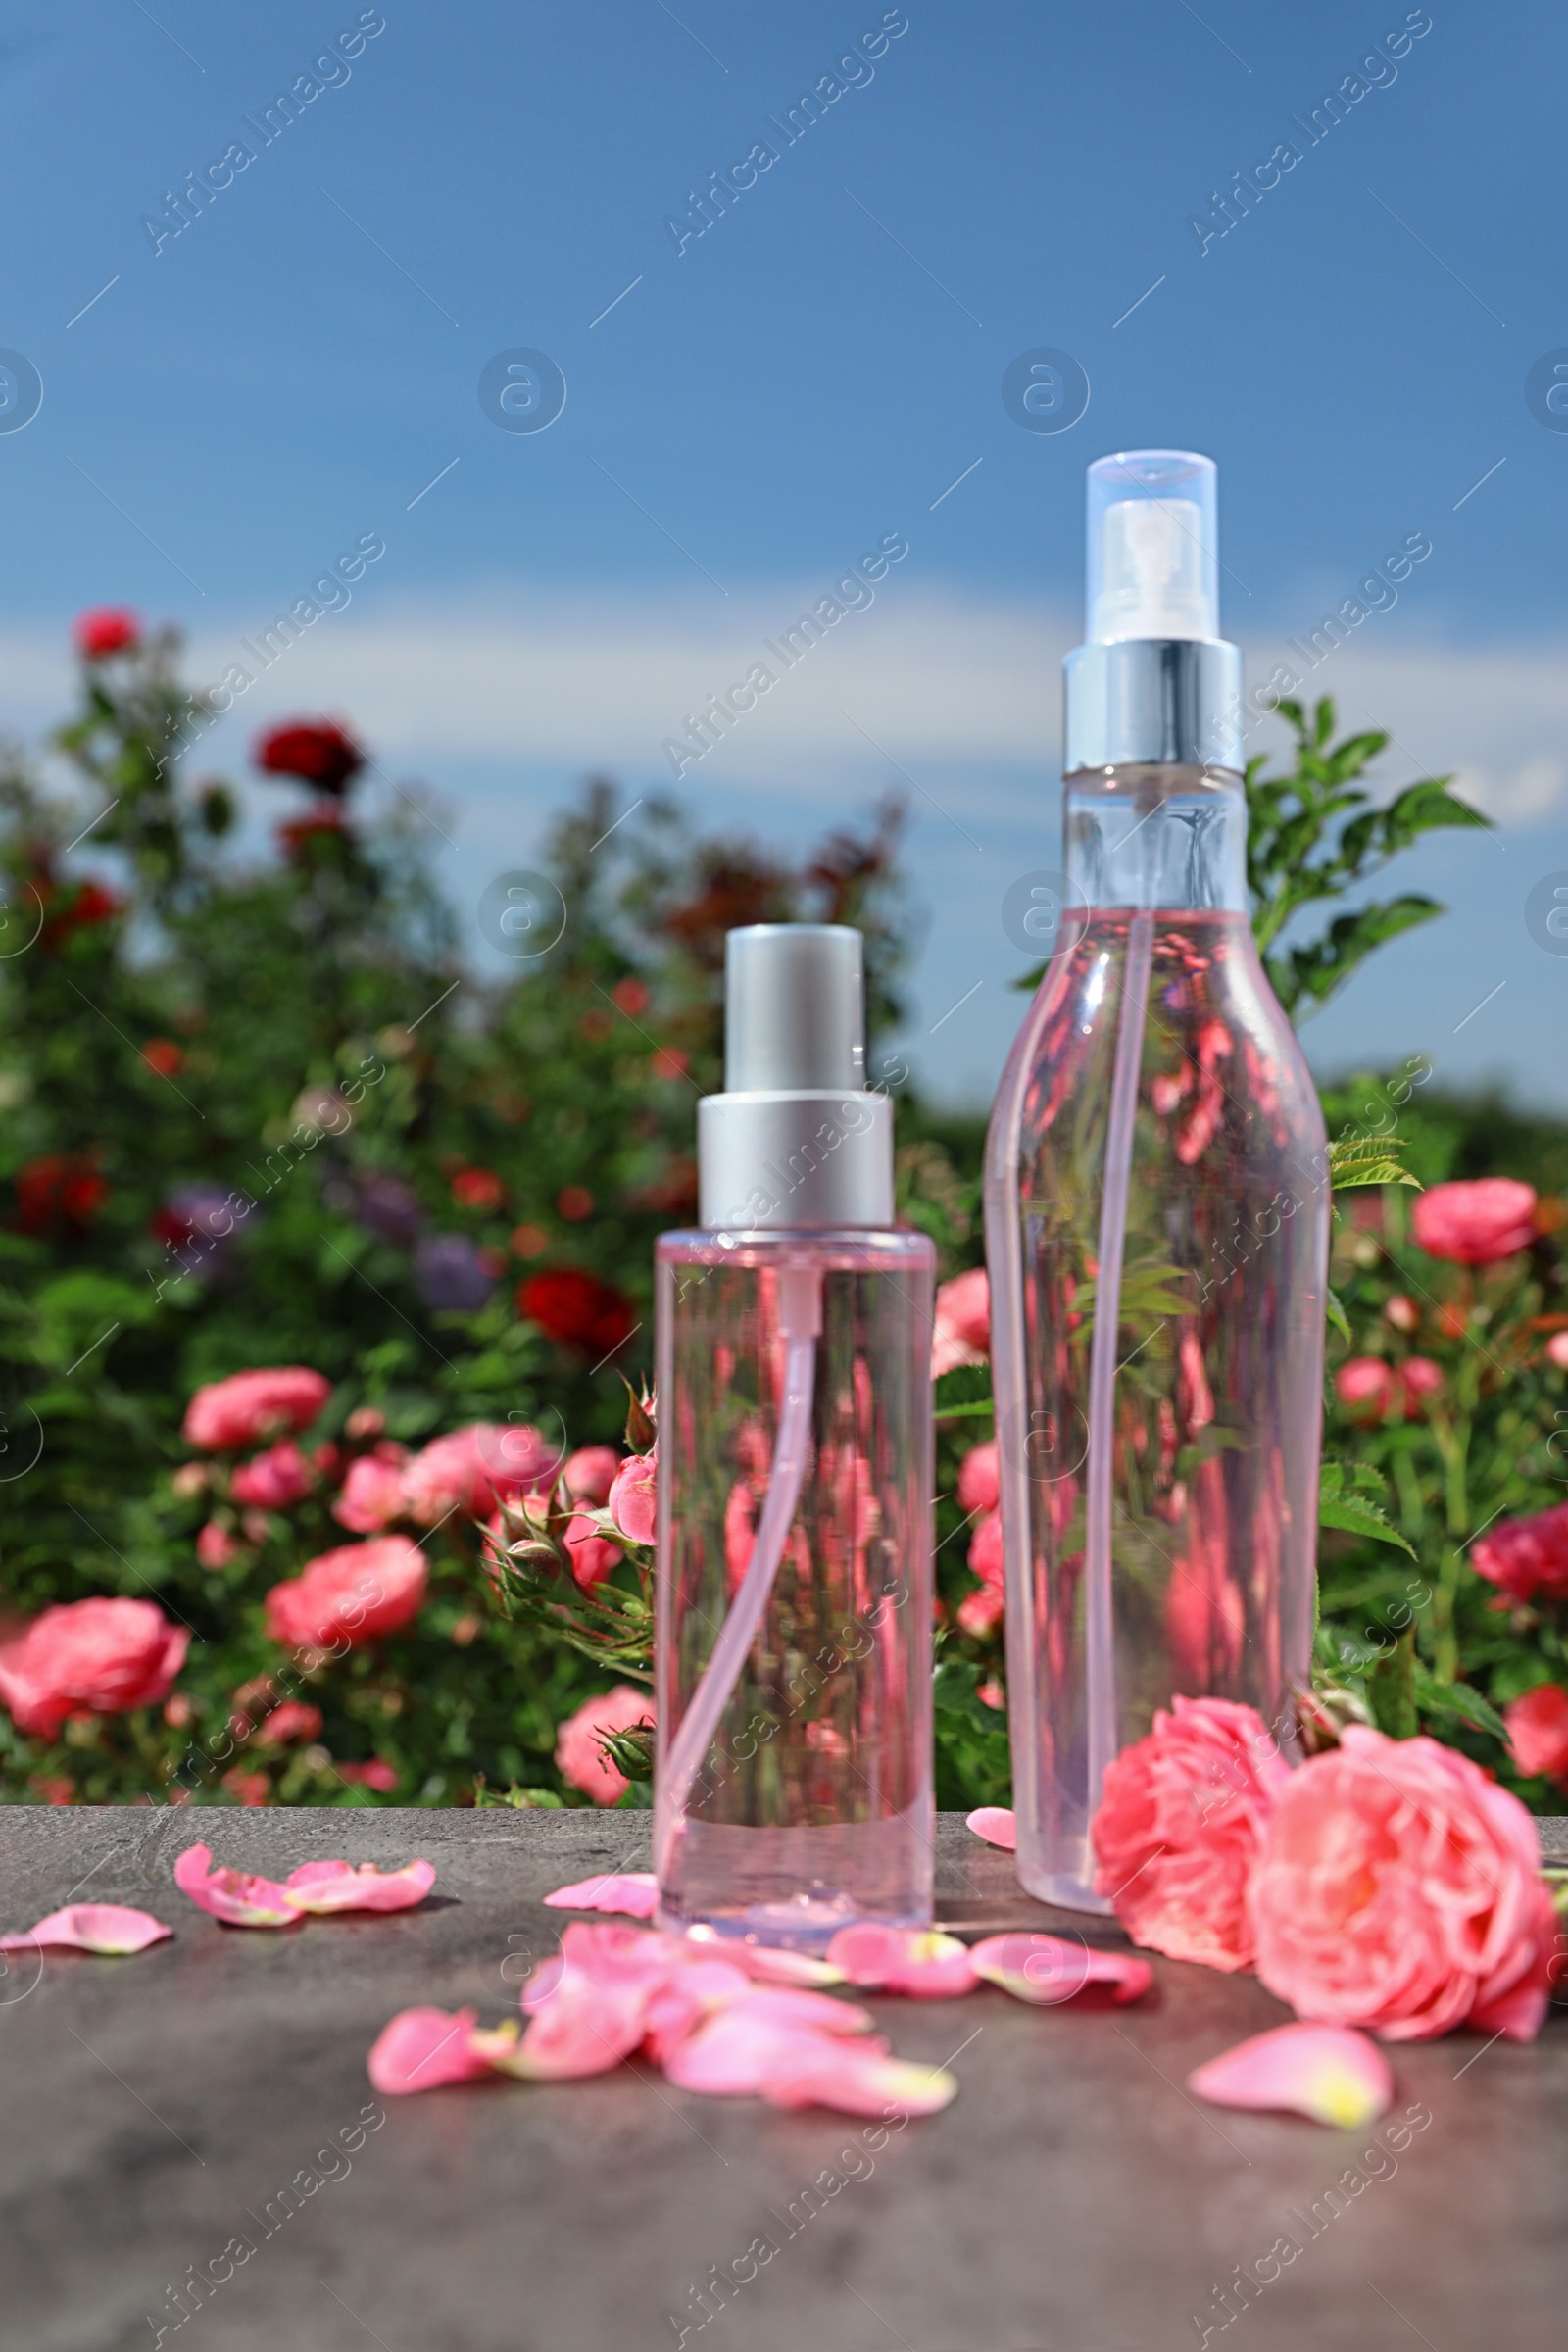 Photo of Bottles of facial toner with essential oil and fresh roses on table against blurred background